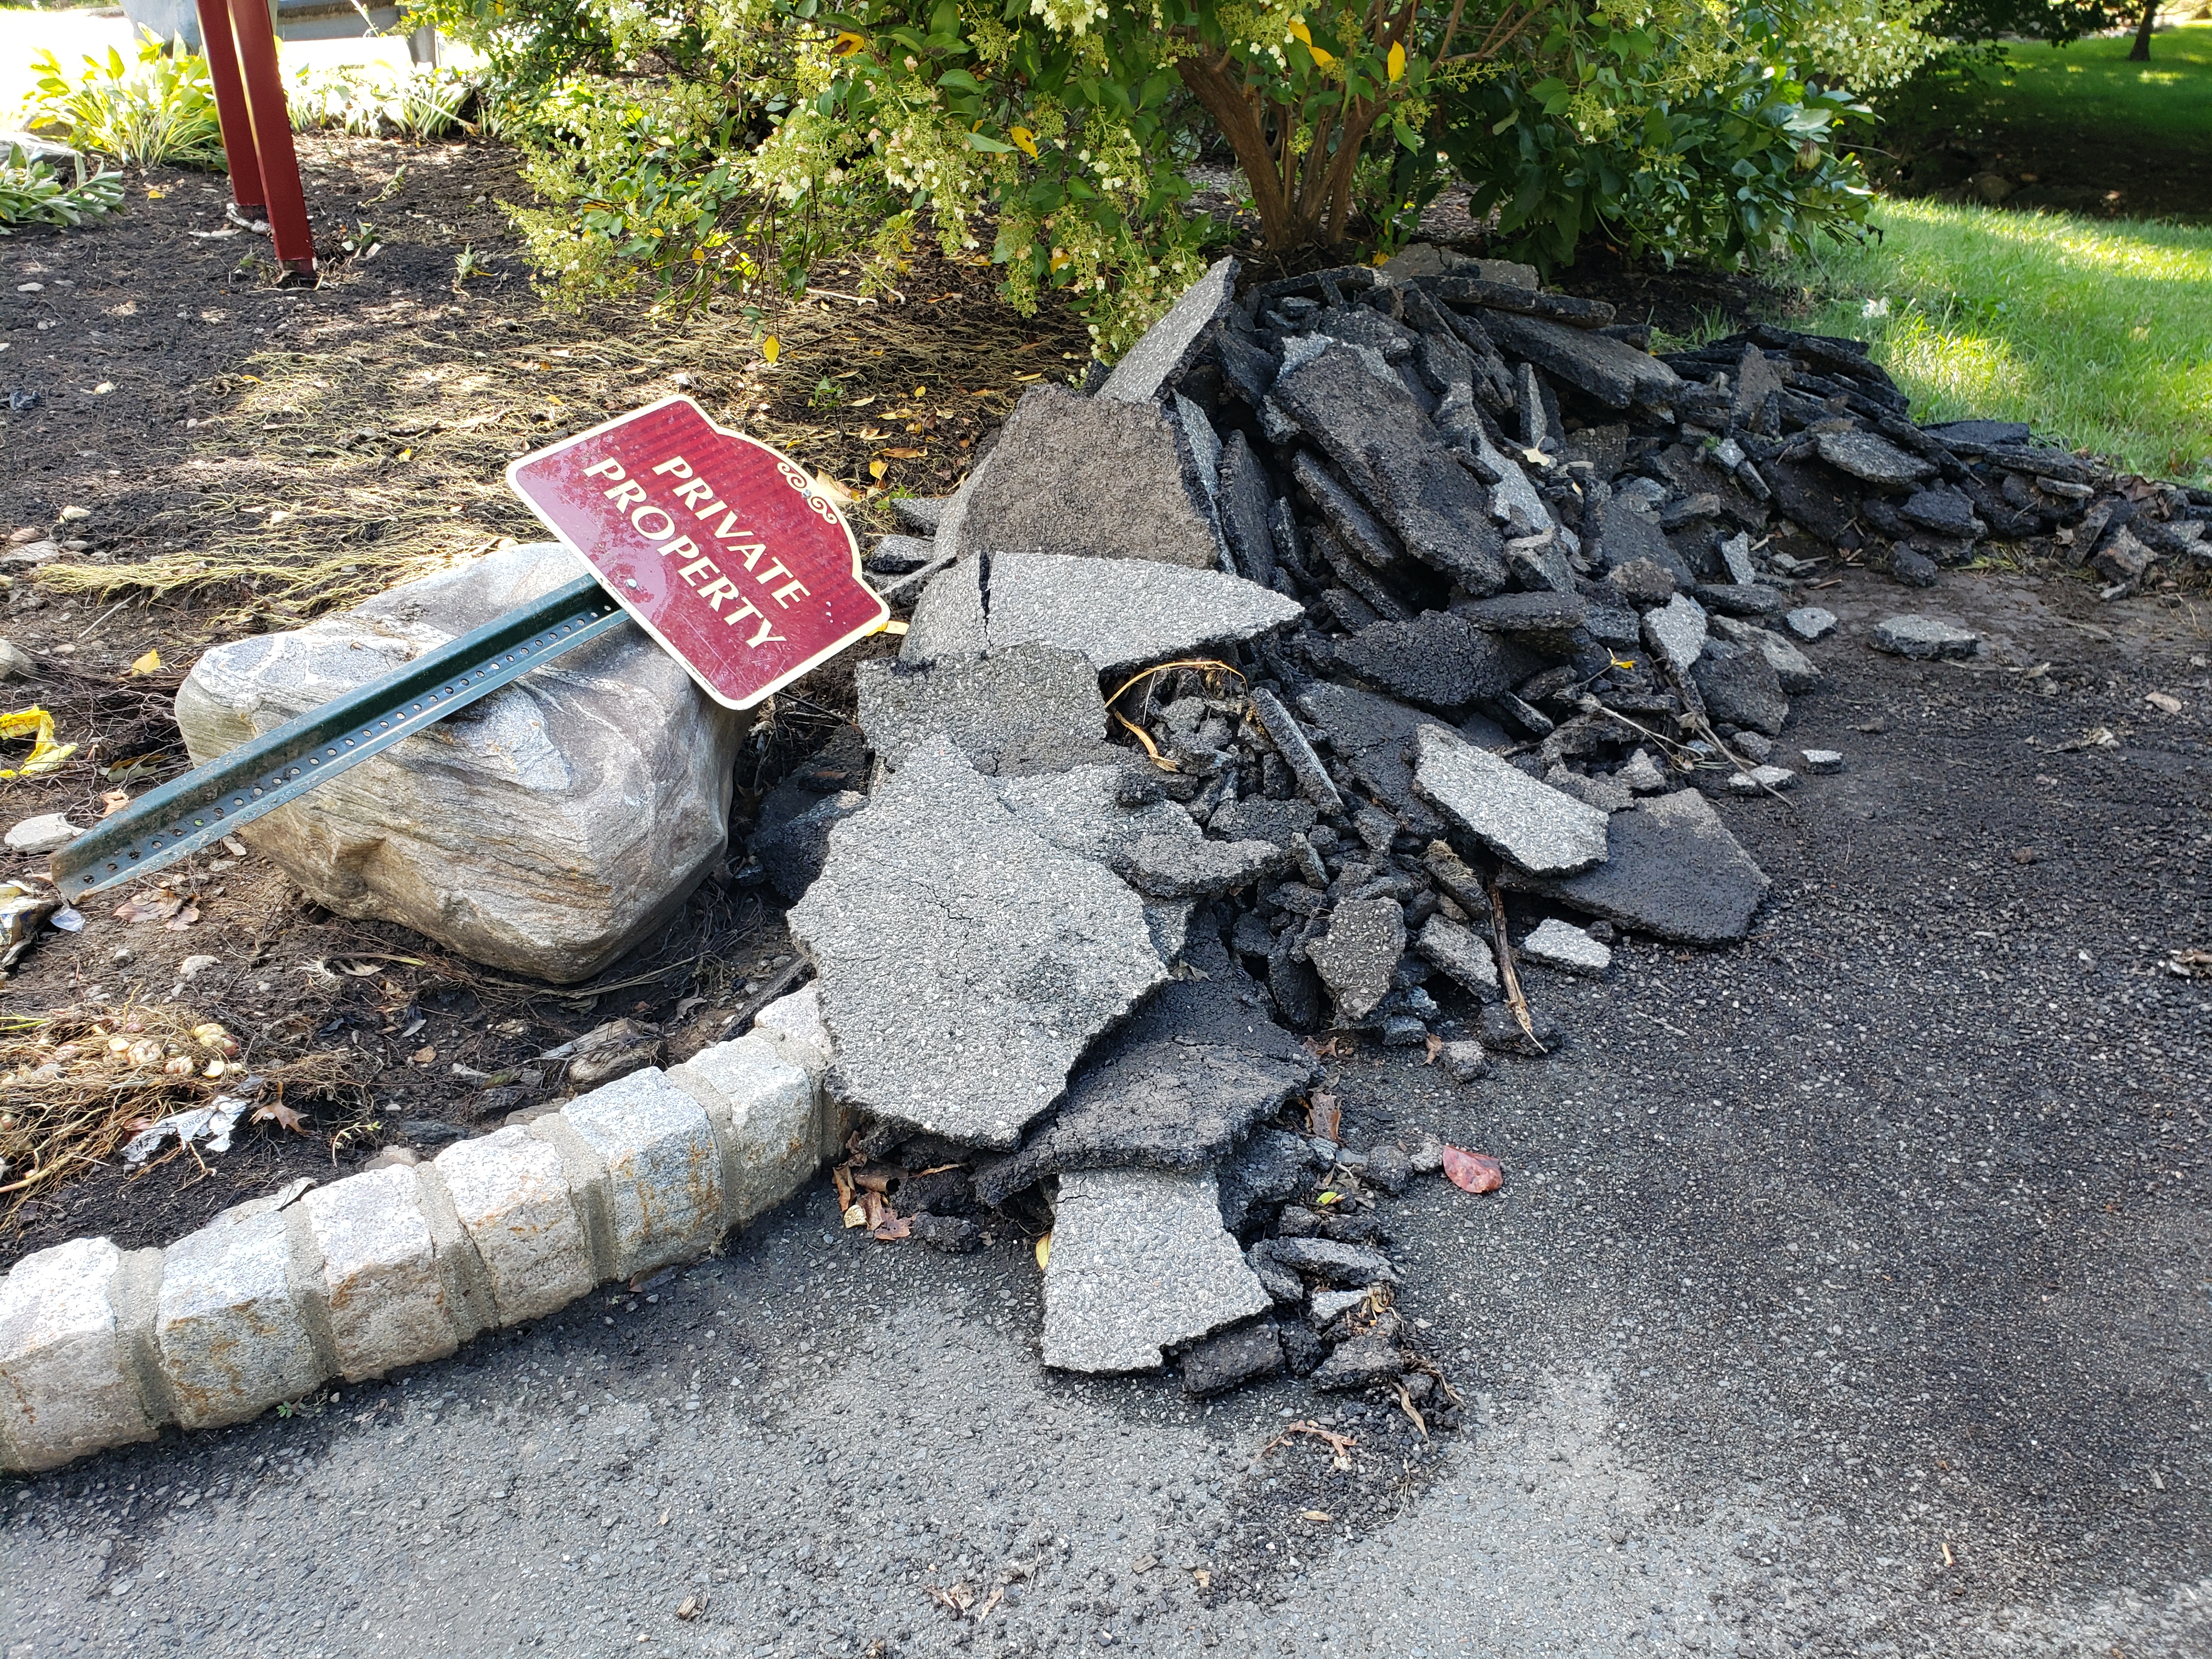 More ripped up pavement